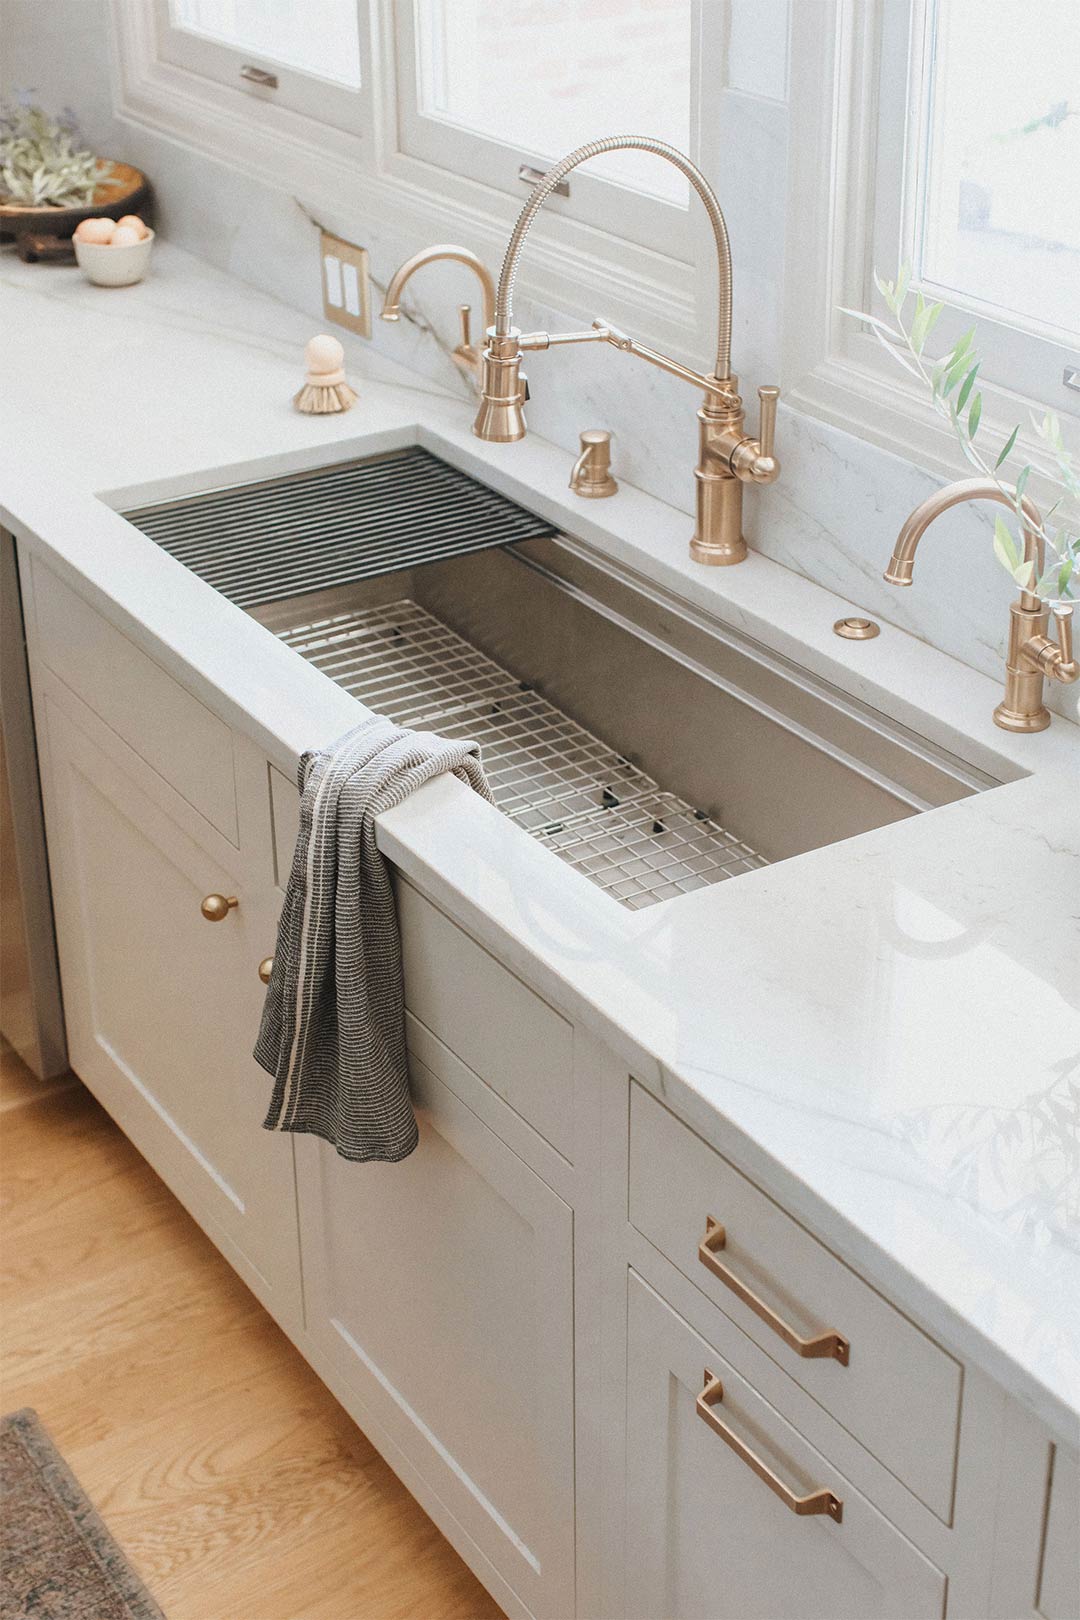 Brizo Artesso Faucets in Luxe Gold paired with a Stainless Steel Workstation Sink from Elkay Crosstown with Quartzite countertops and a slab backsplash.